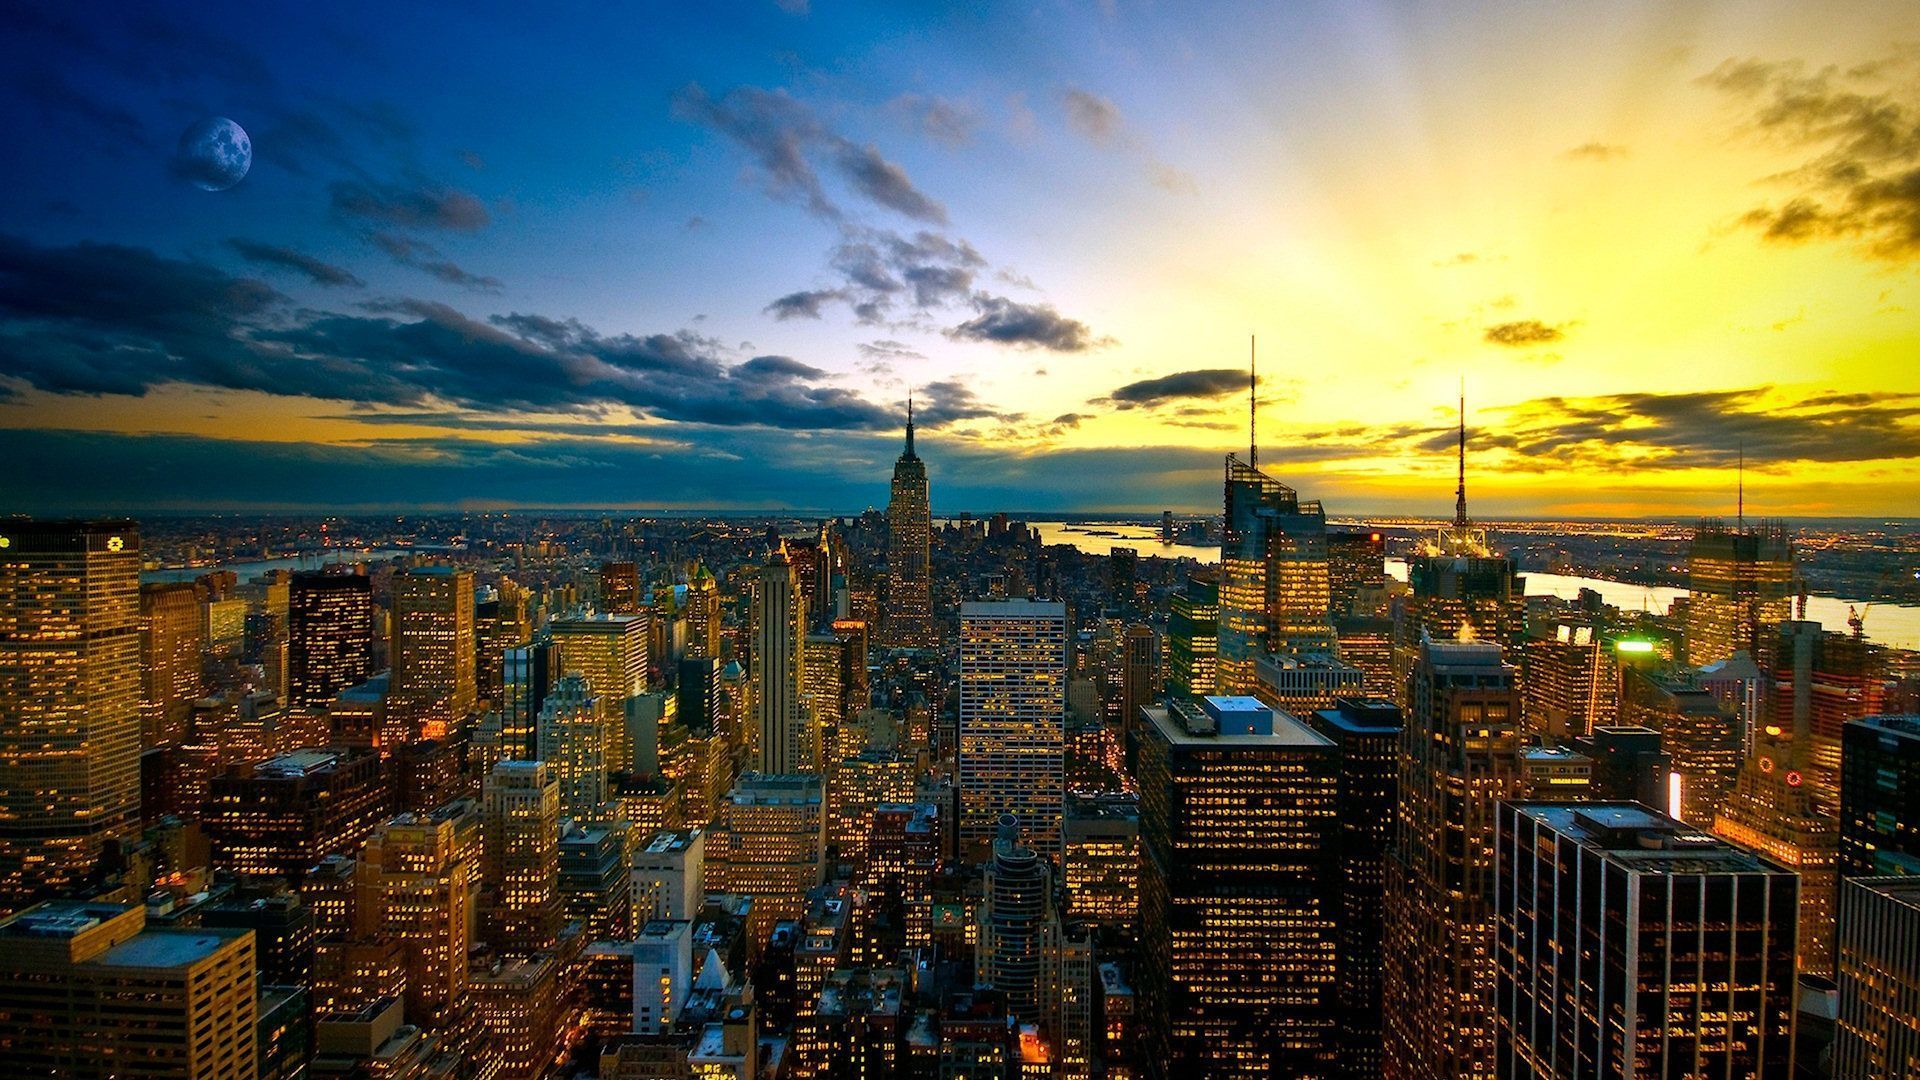 Cityscape Full HD Widescreen wallpapers for desktop download